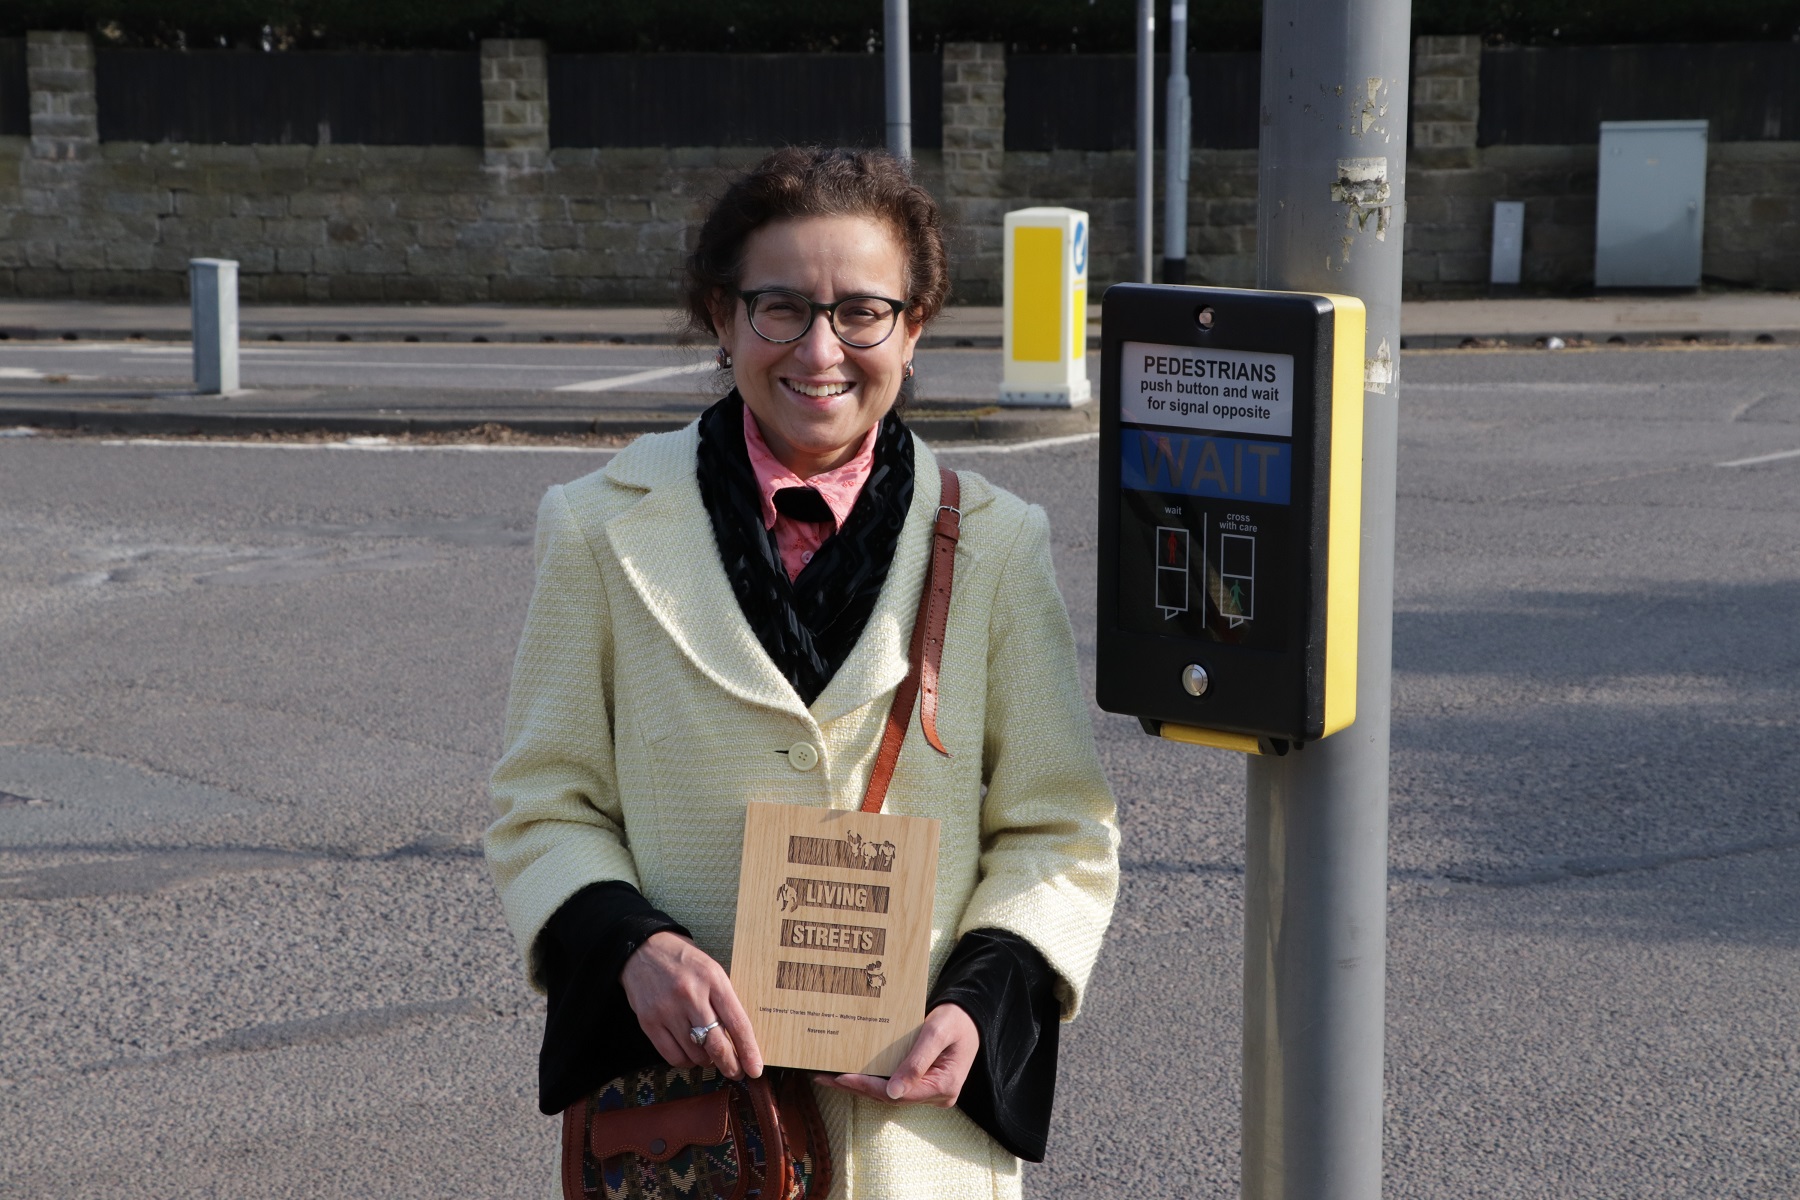 Nasreen Hanif is standing by a pedestrian crossing holding a wooden plaque